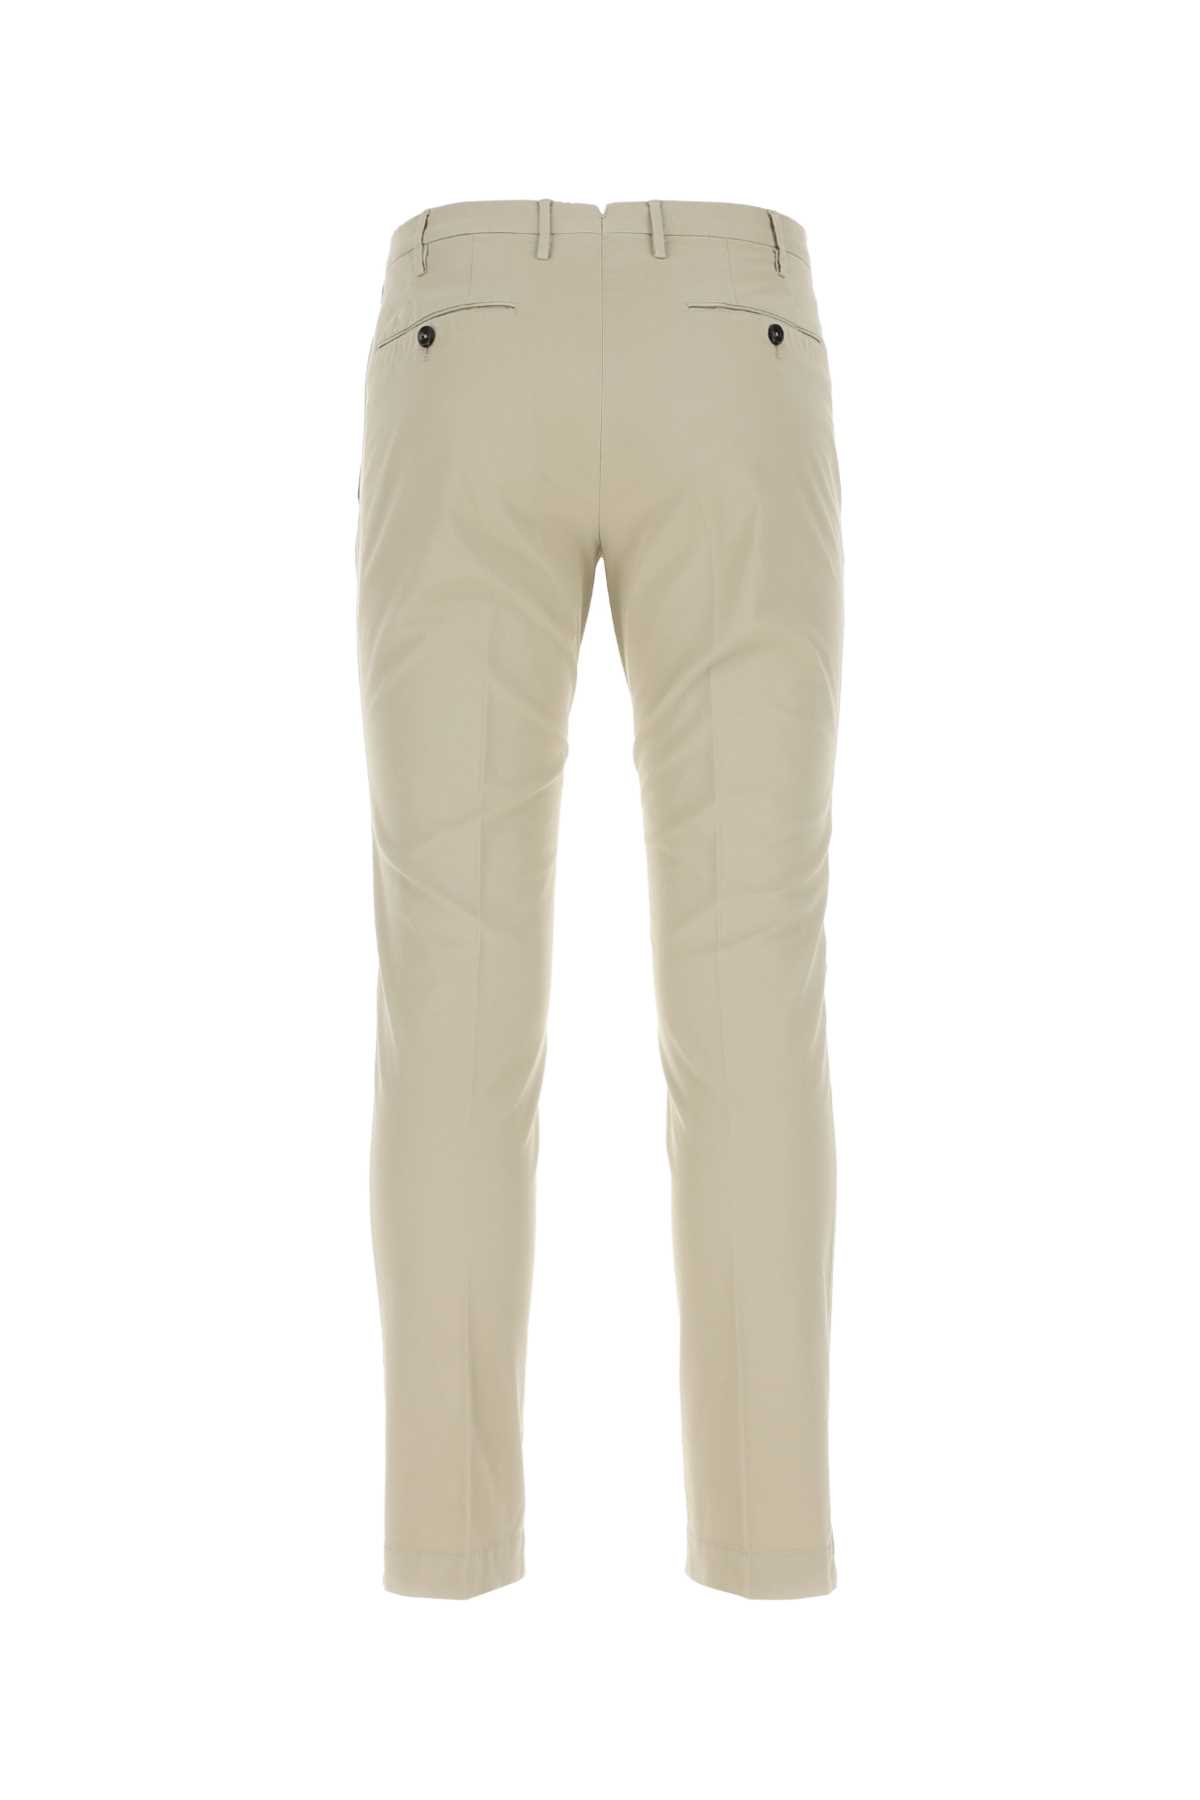 Pt01 Beige Stretch Cotton Pant In 0010